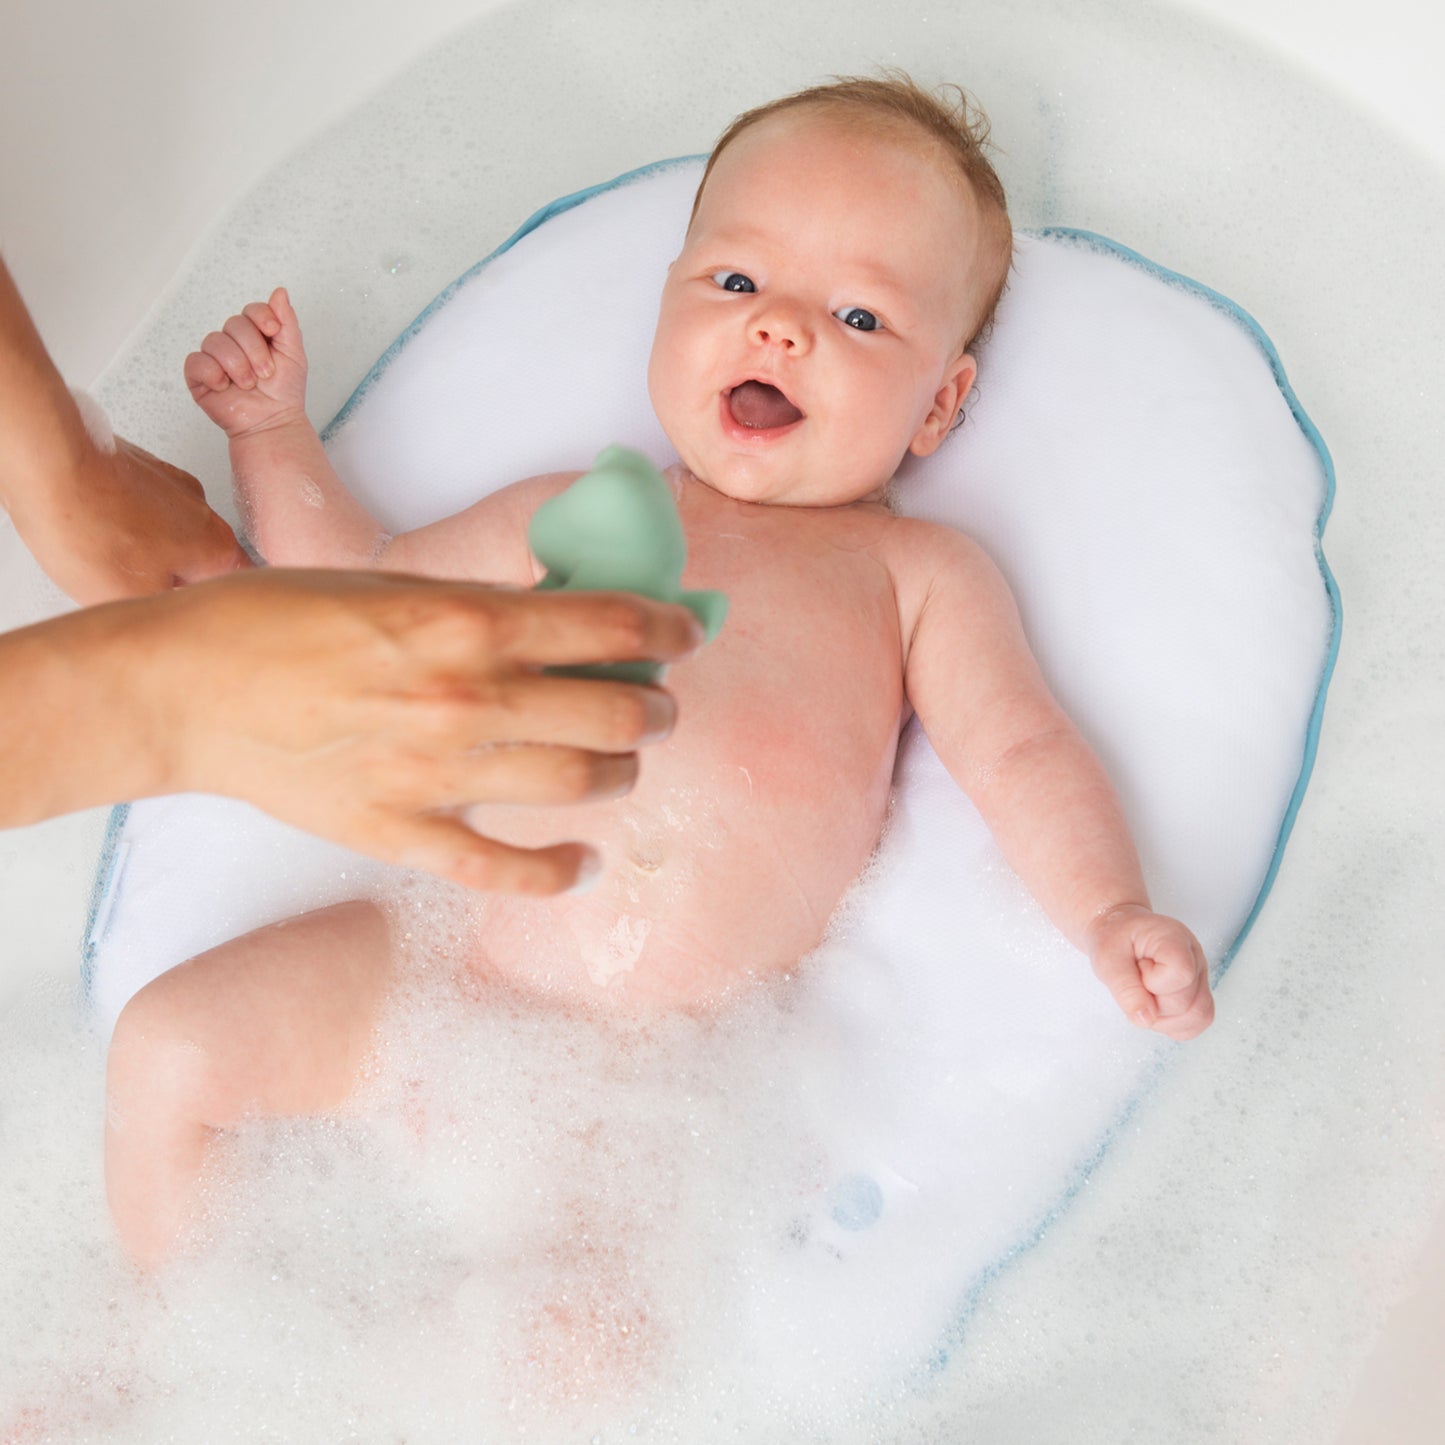 Bath cushion to bath you baby handsfree. He can safly ly in the water. Safe for baby and no back strains for the parents